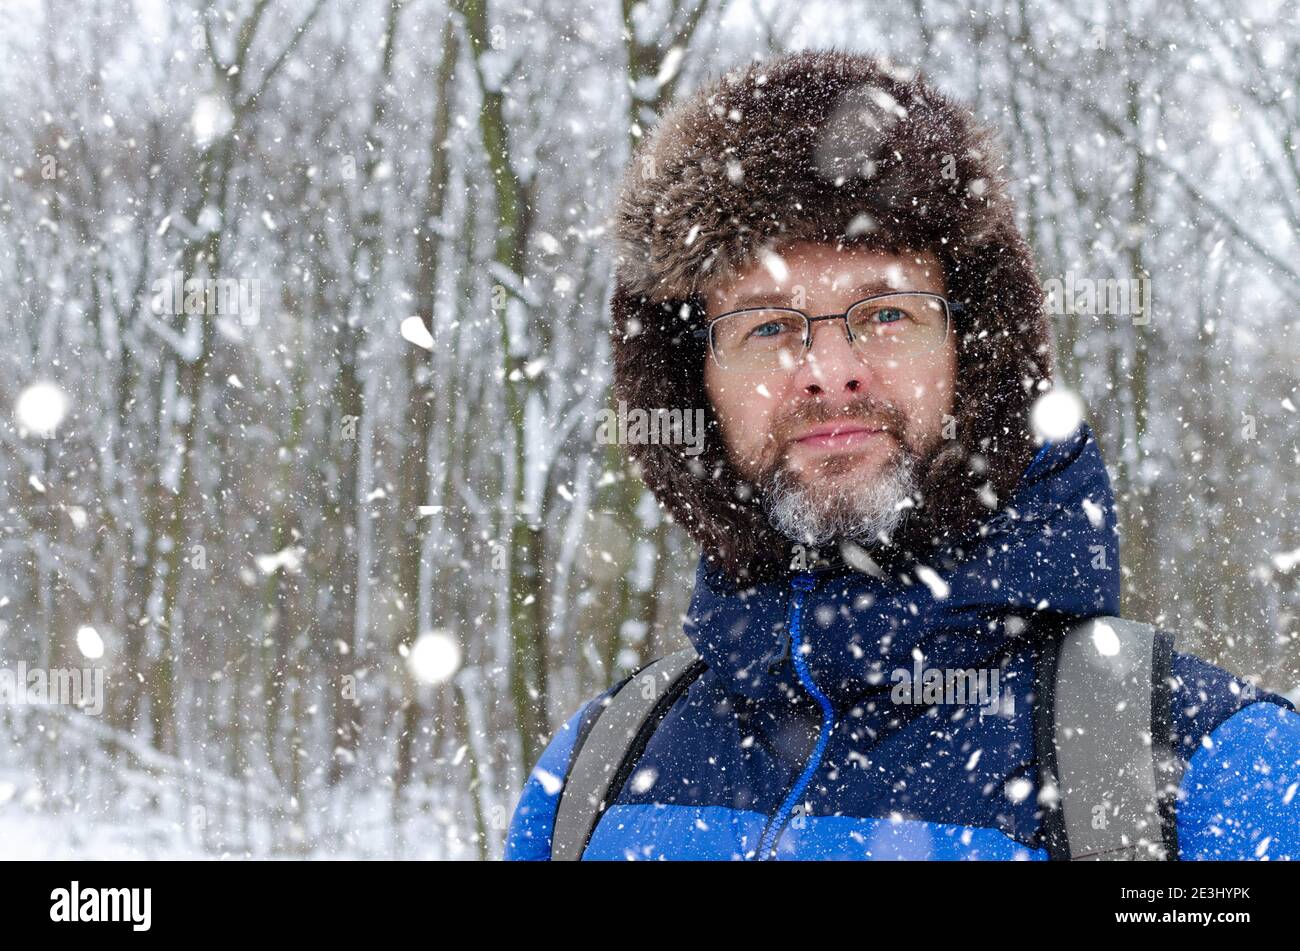 Portrait close up of a mddle aged man with grey beard in a snowy winter forest Stock Photo